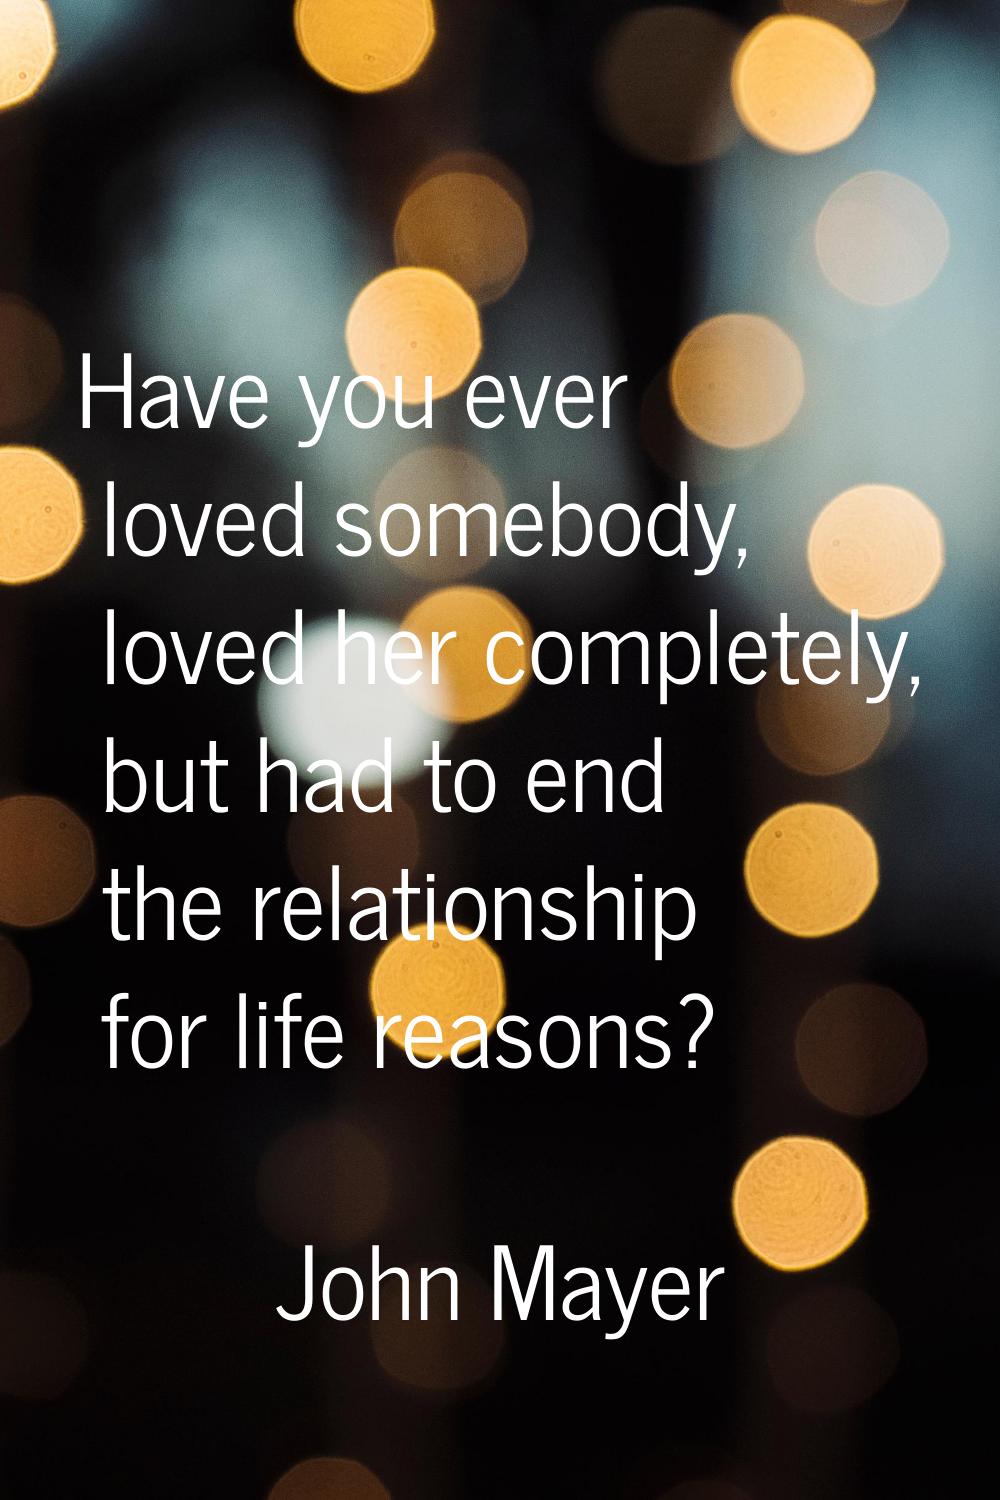 Have you ever loved somebody, loved her completely, but had to end the relationship for life reason